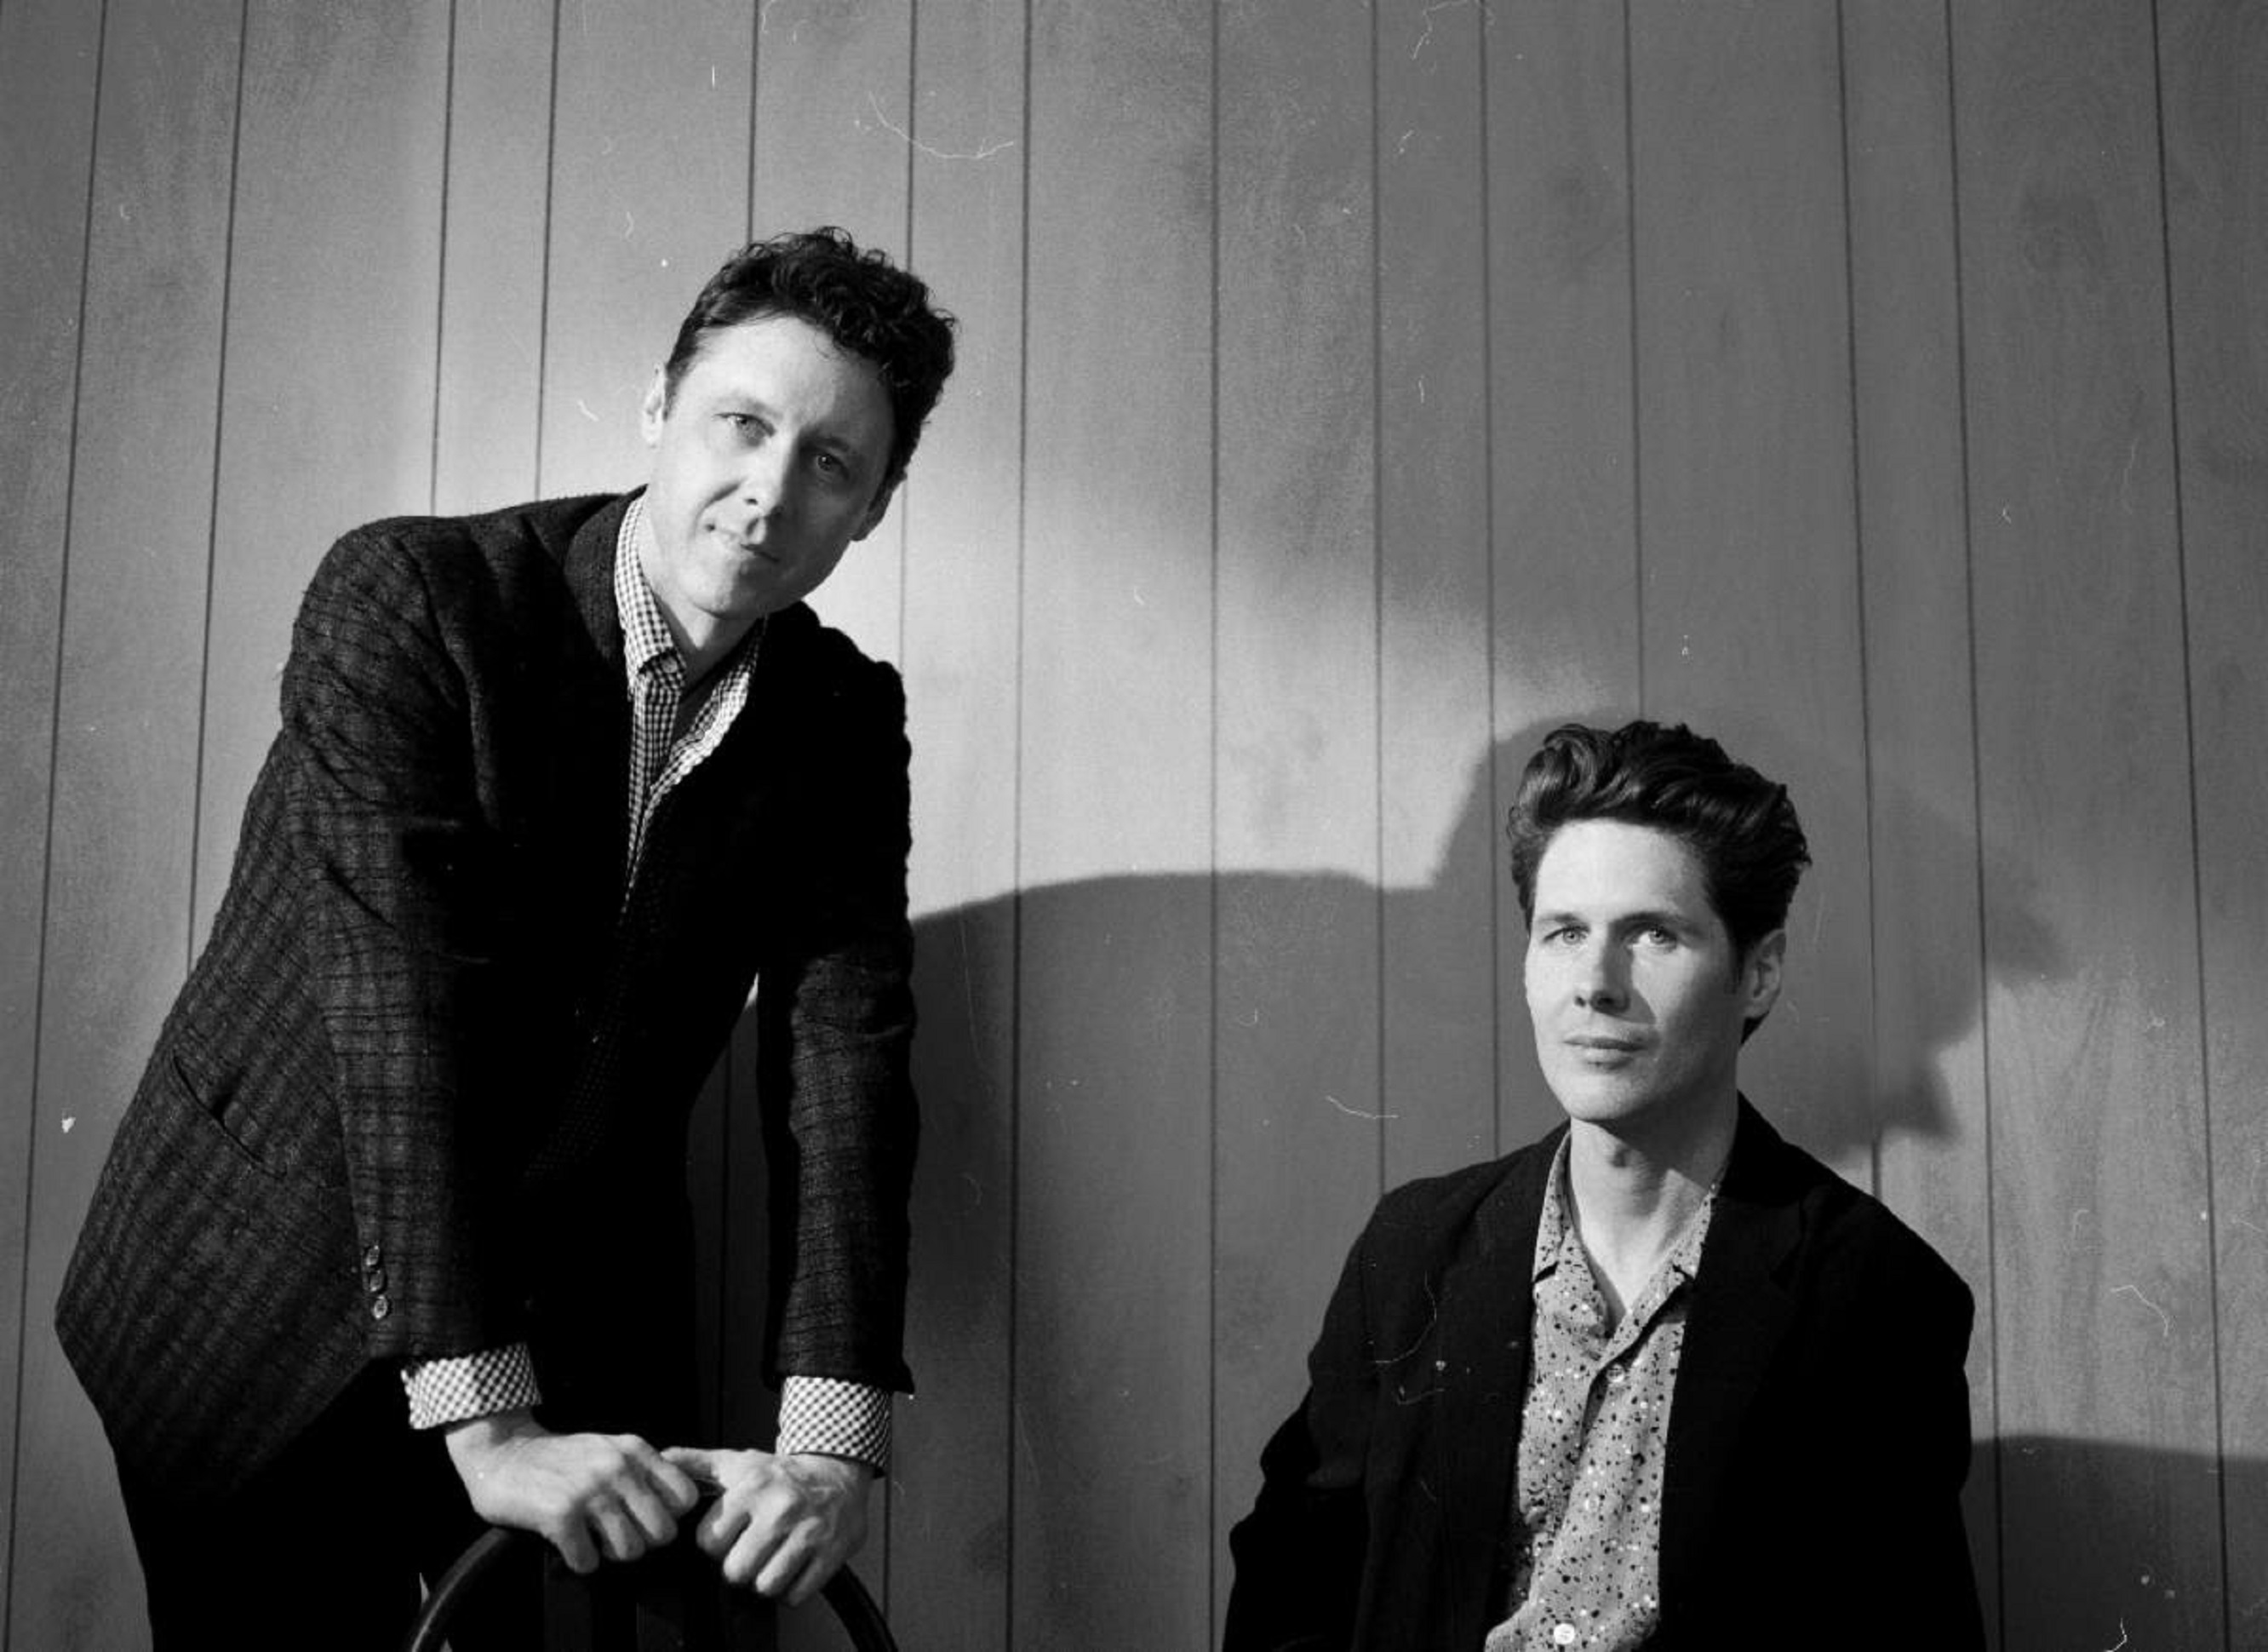 The Cactus Blossoms announce fall dates including the Kennedy Center and Midwest shows with Wilco